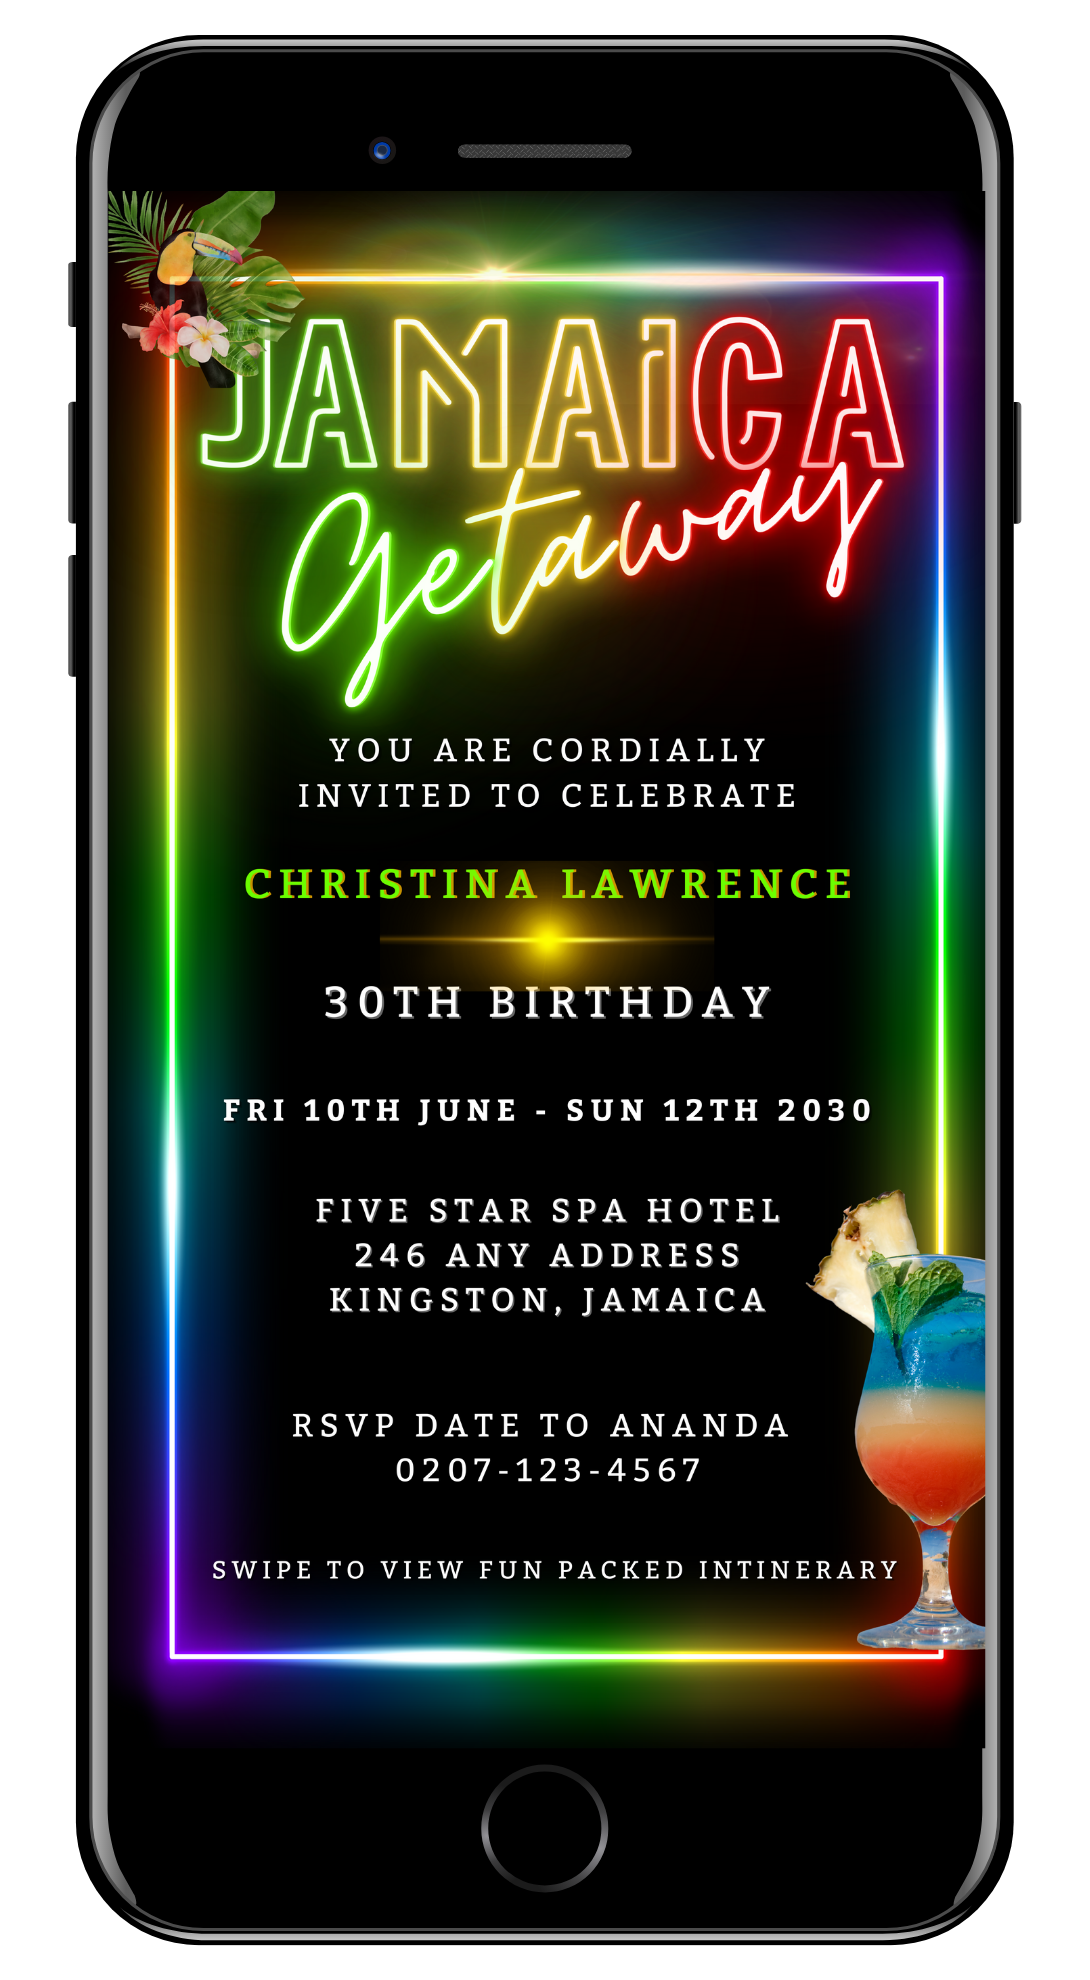 Jamaica Colourful Neon | Getaway Party Evite displayed on a smartphone screen, featuring customizable text and neon design elements.